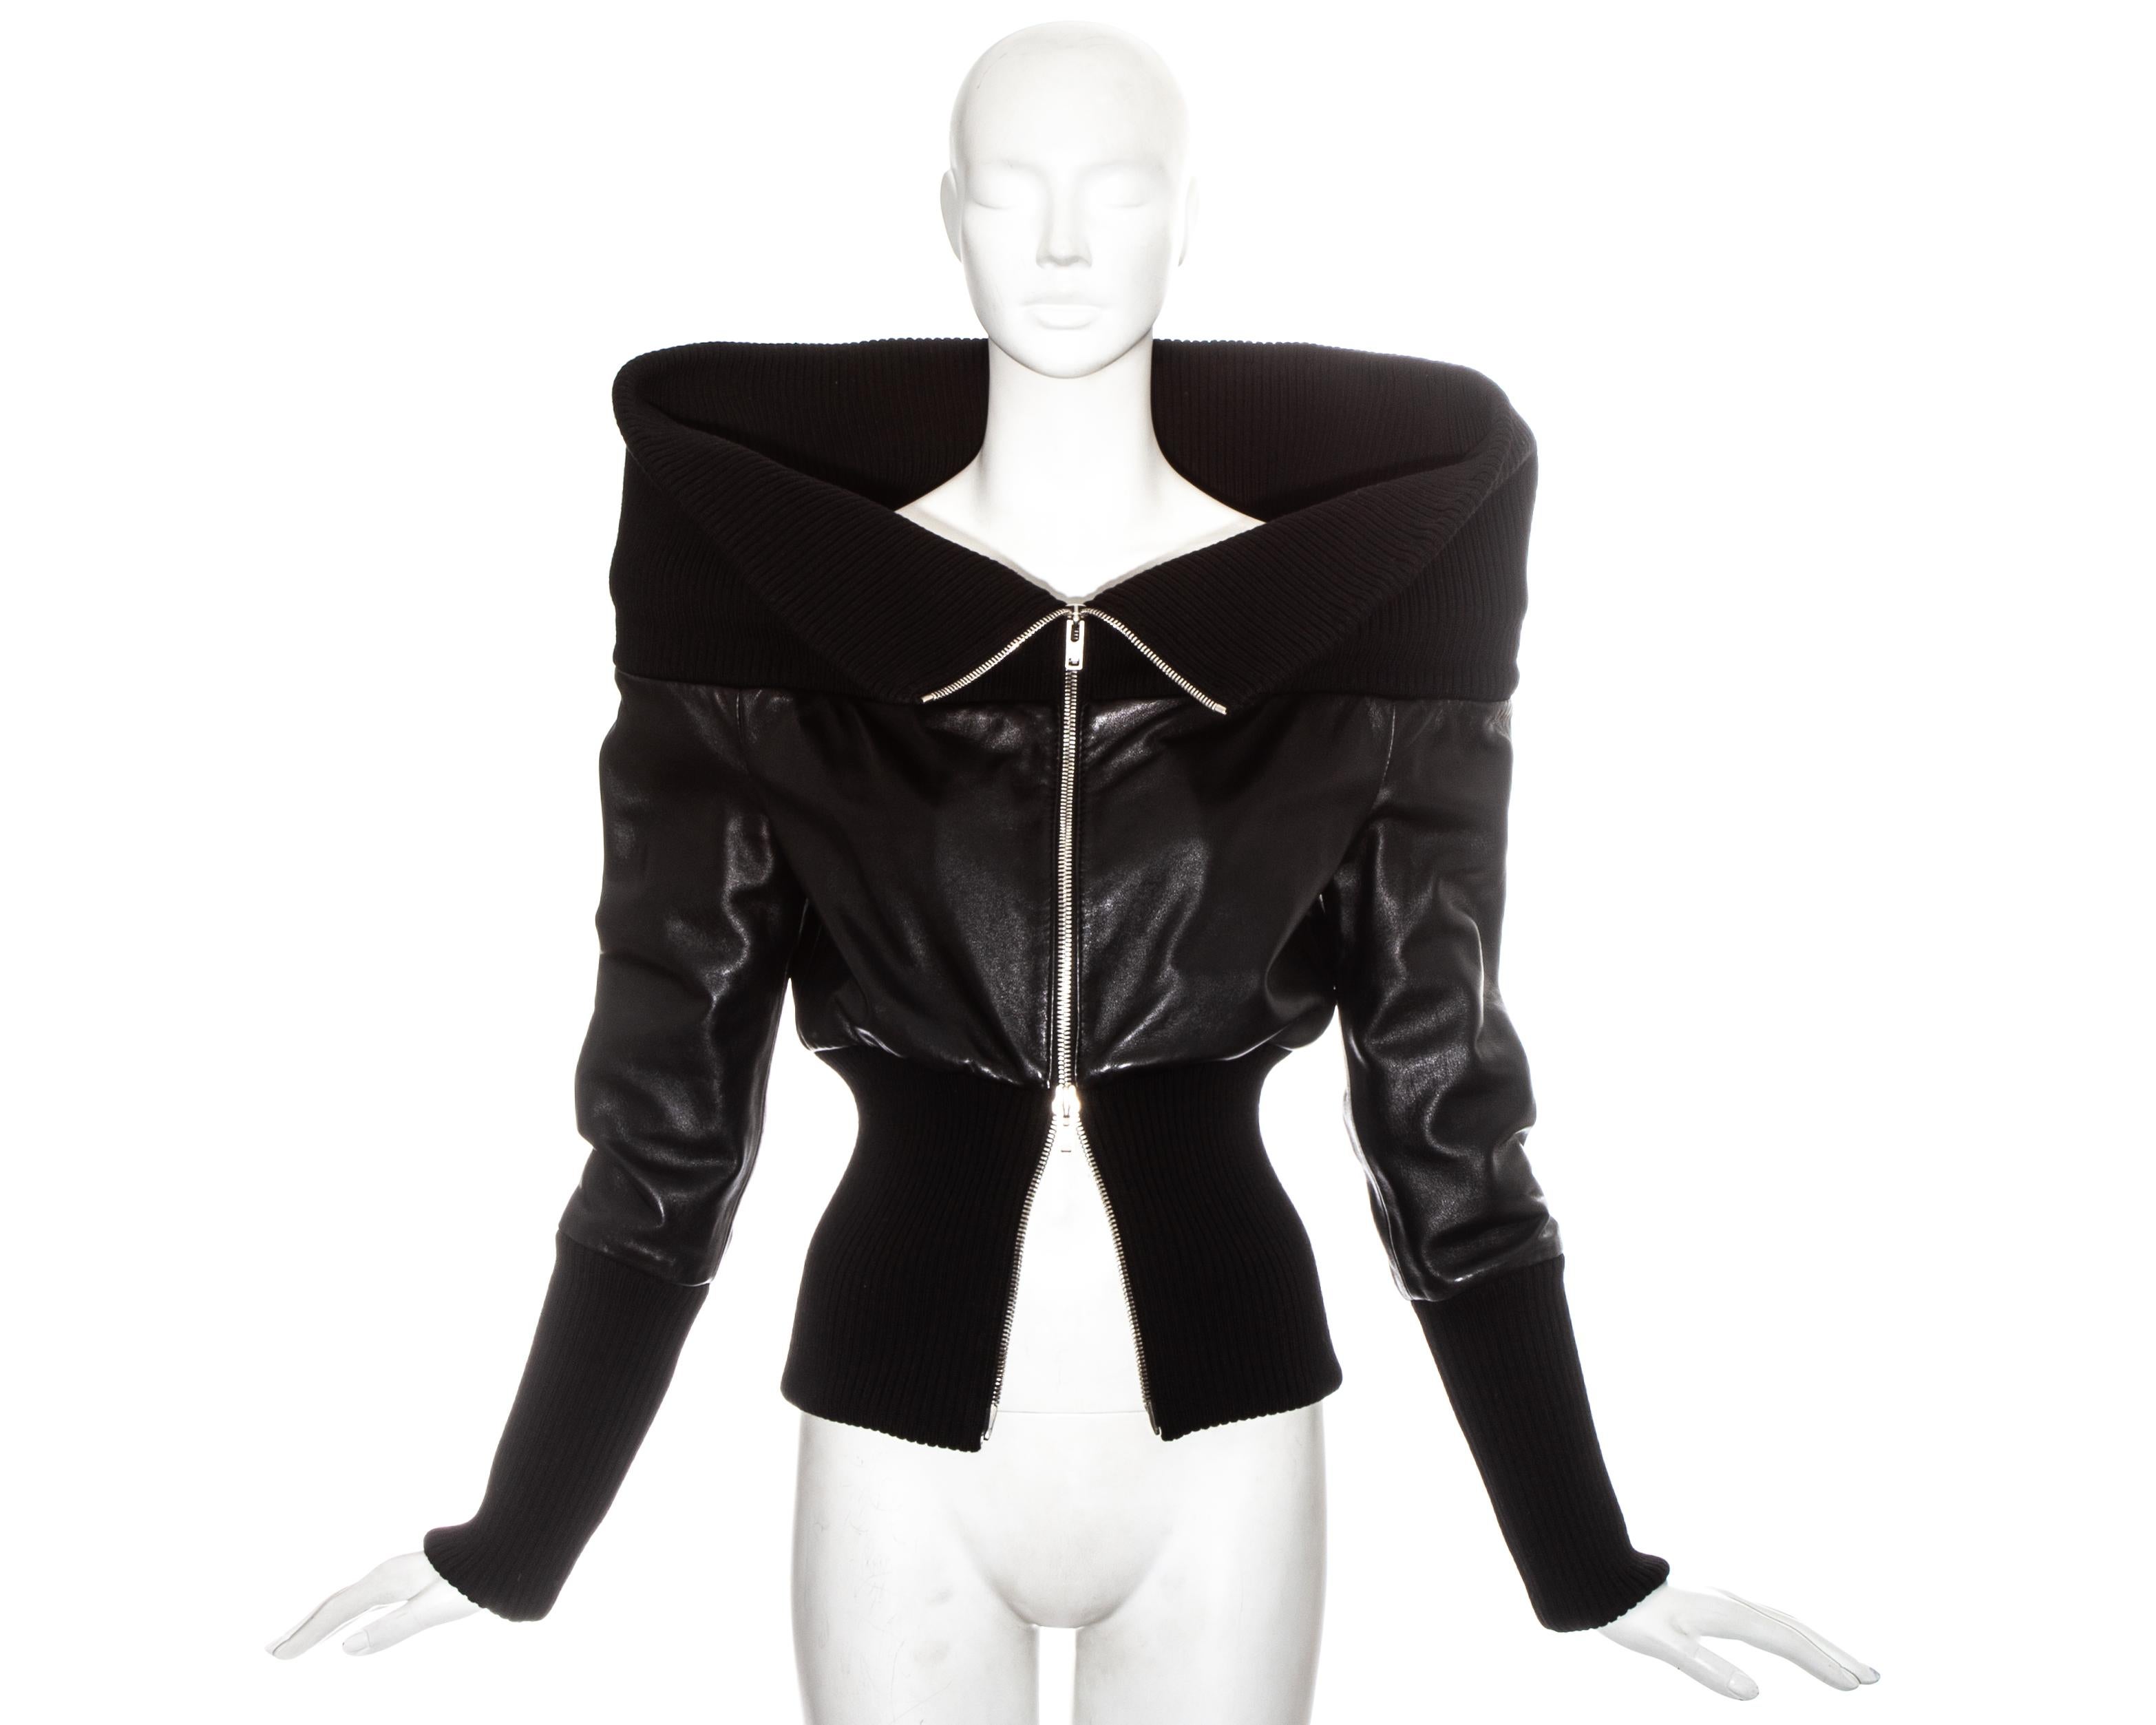 Martin Margiela black leather jacket with metal double ended zip fastening, rib knit cuffs, waist band and funnel neck collar, and built in shoulder pads.

Fall-Winter 2008